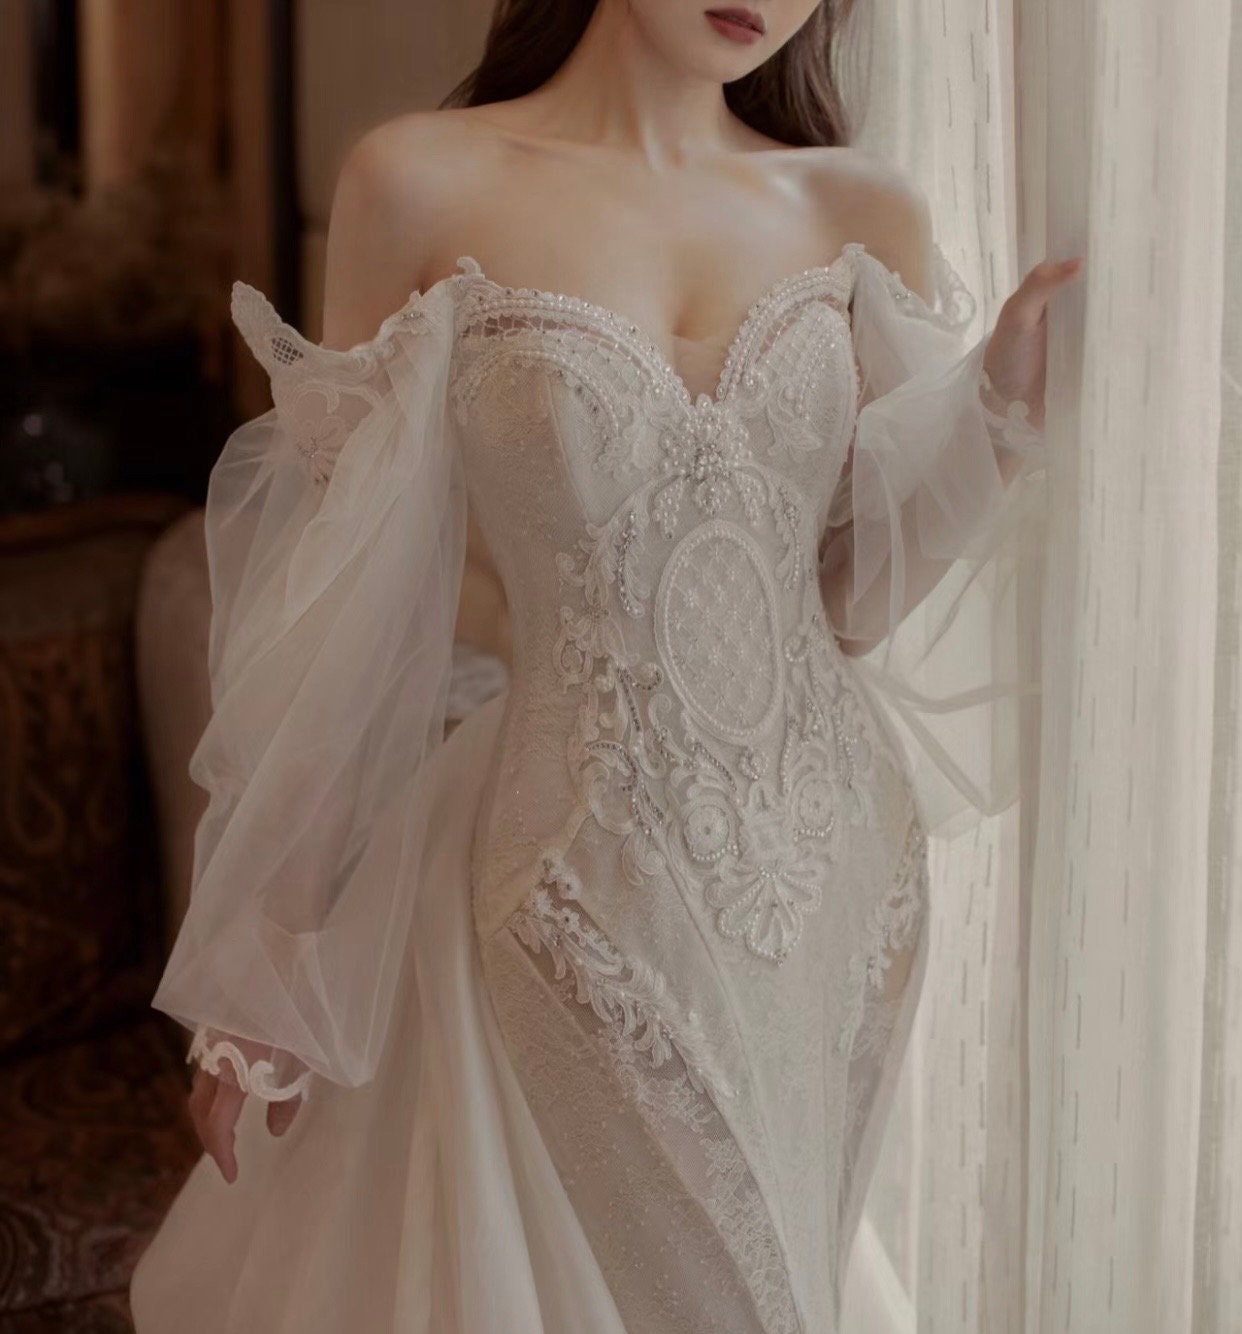 Long Sleeve Off the Shoulder Lace Mermaid Wedding Dress with detachable Train, Custom Unique Courthouse wedding elope dress, reception dress